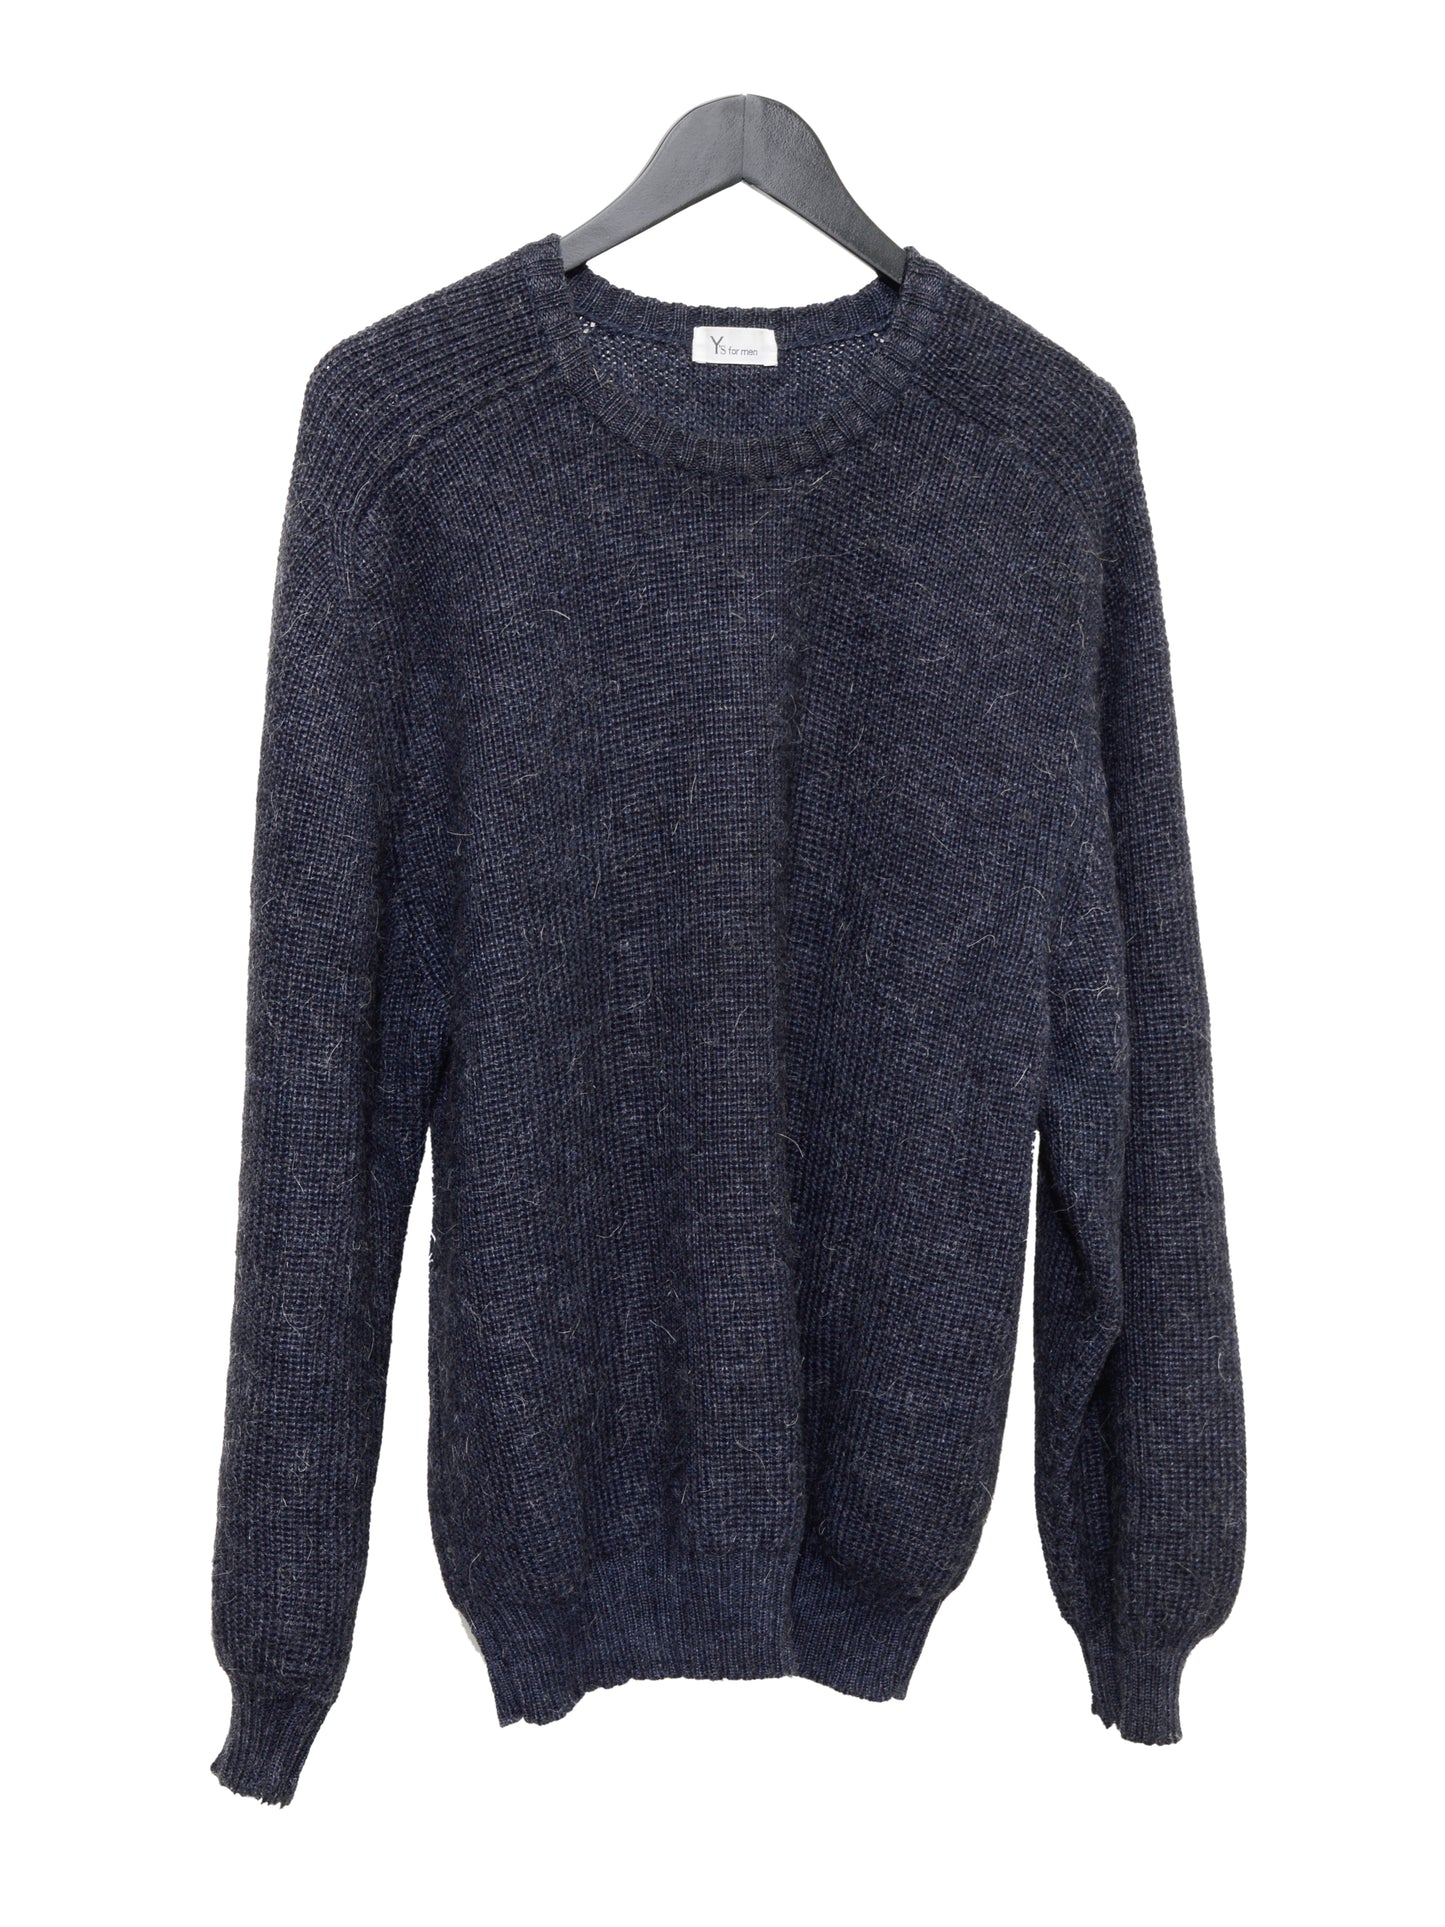 saddle pullover navy ∙ linen wool ∙ one size